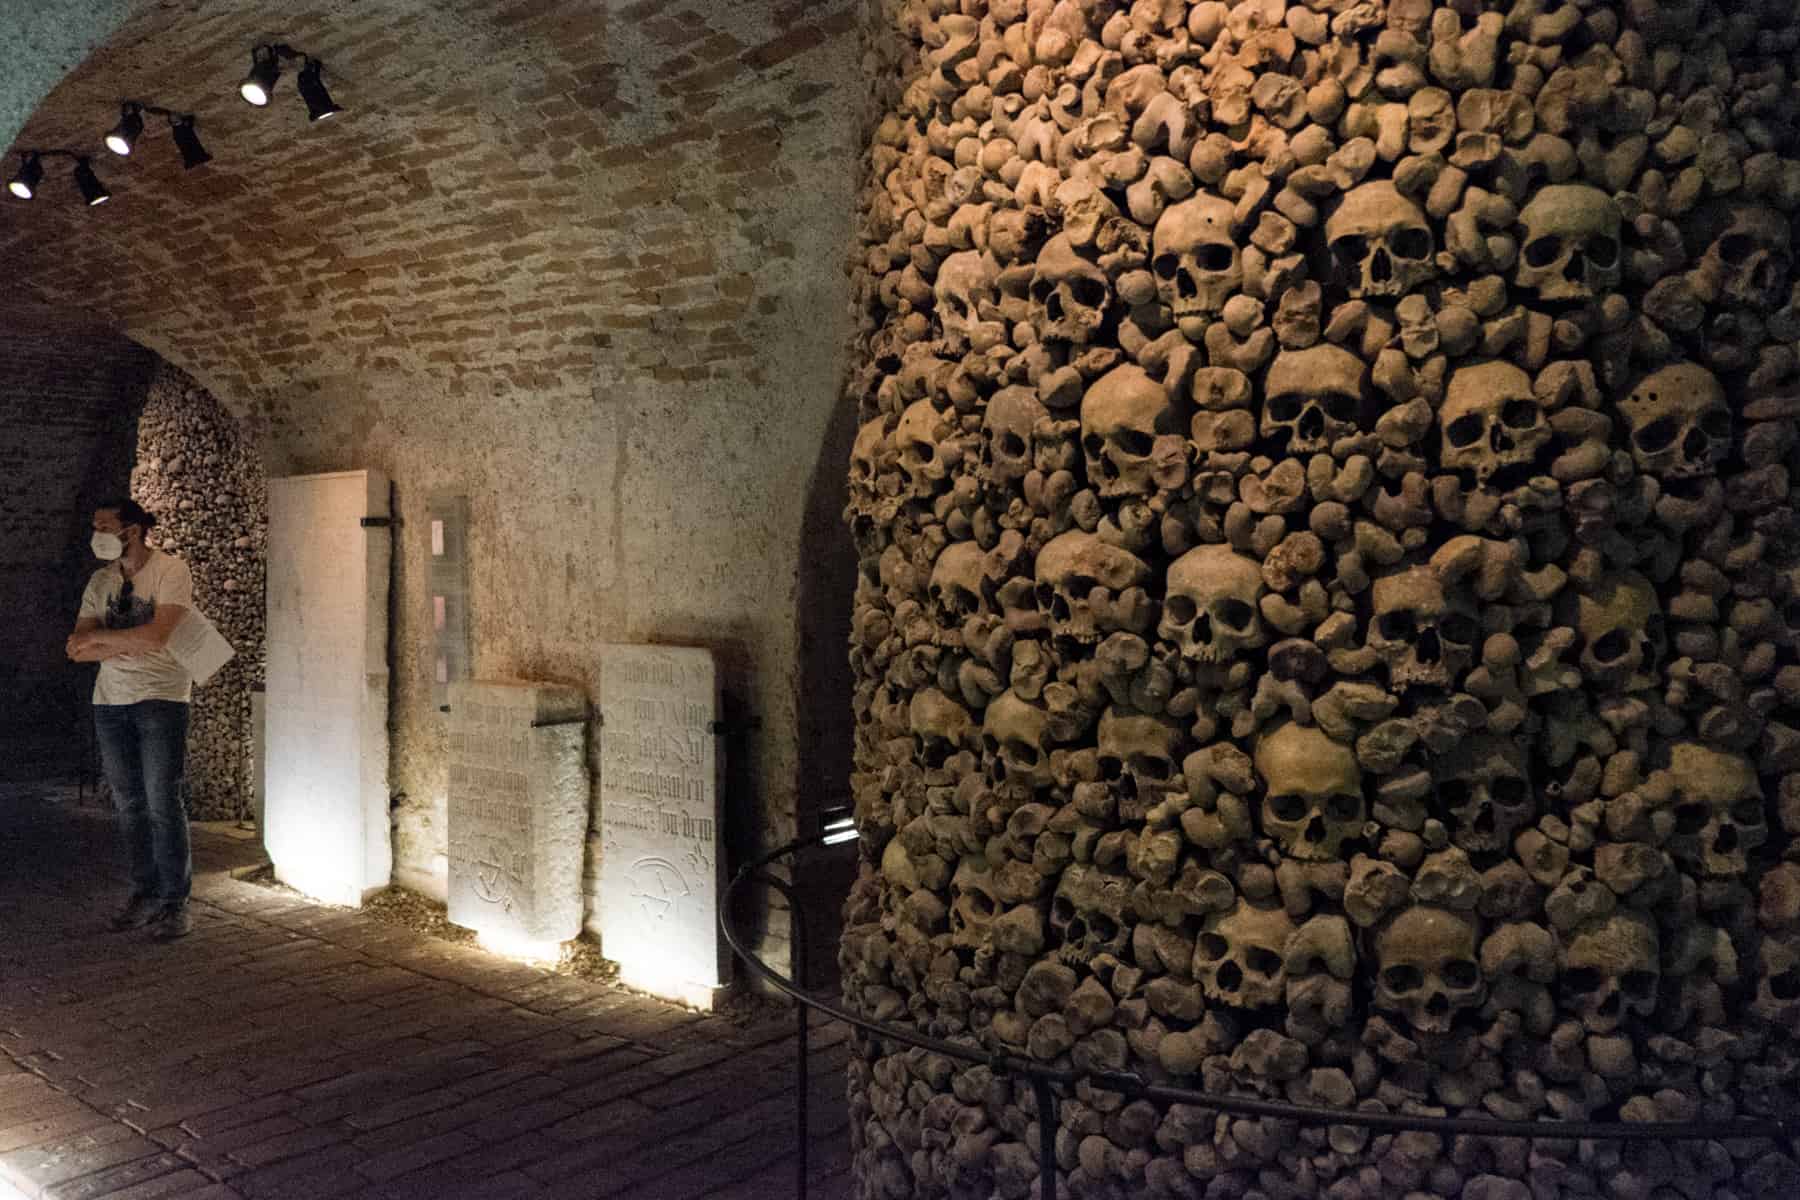 A man stands in from of white tombstones (left) in a room filled with a cylindrical tower of skulls and bones. One of the curious things to do in Brno. 